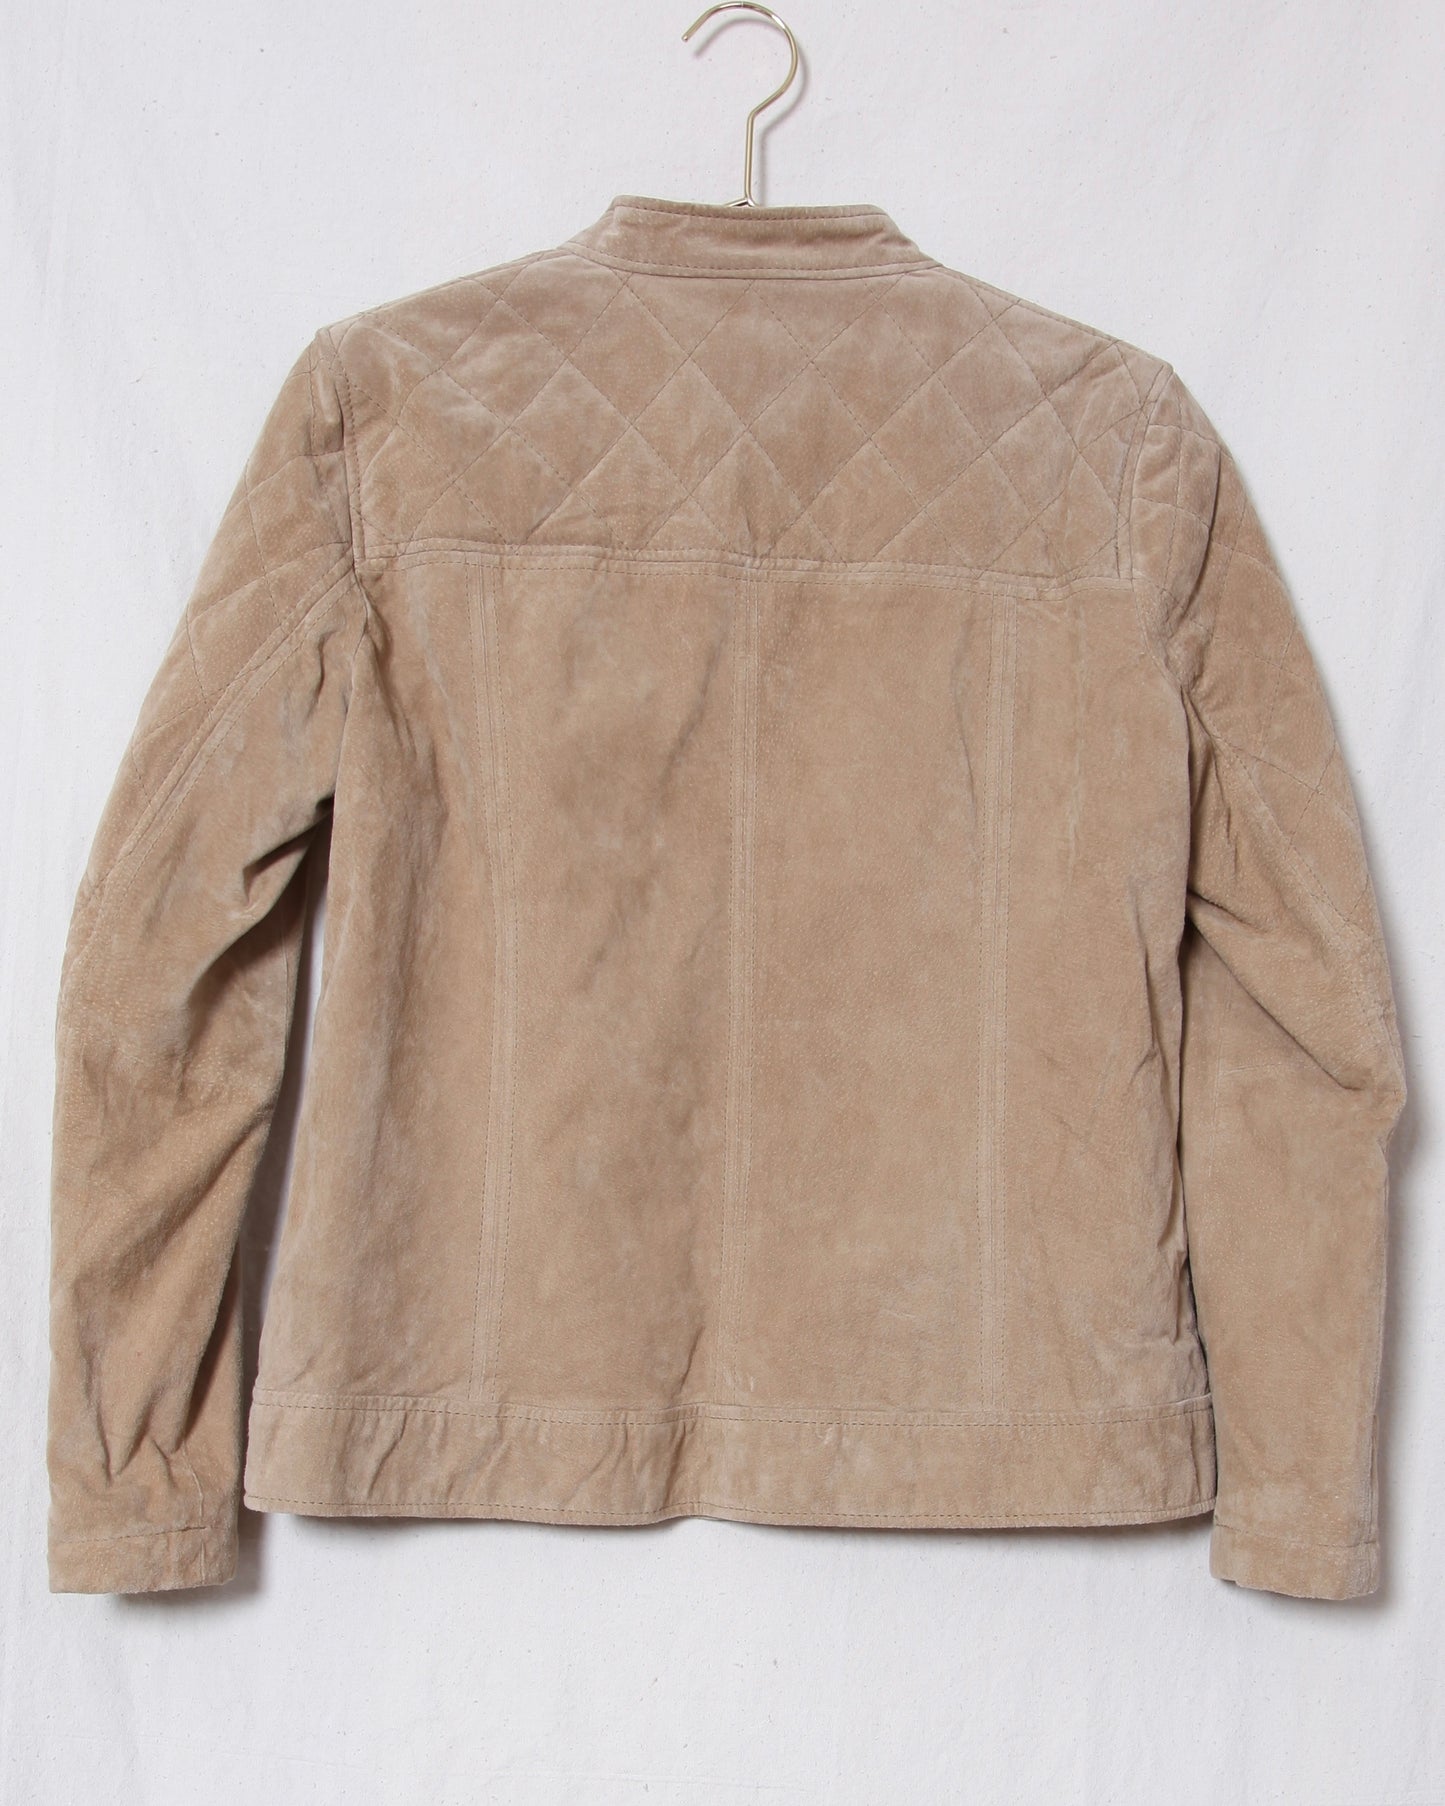 00s Vtg Quilted Suede Moto Jacket $142